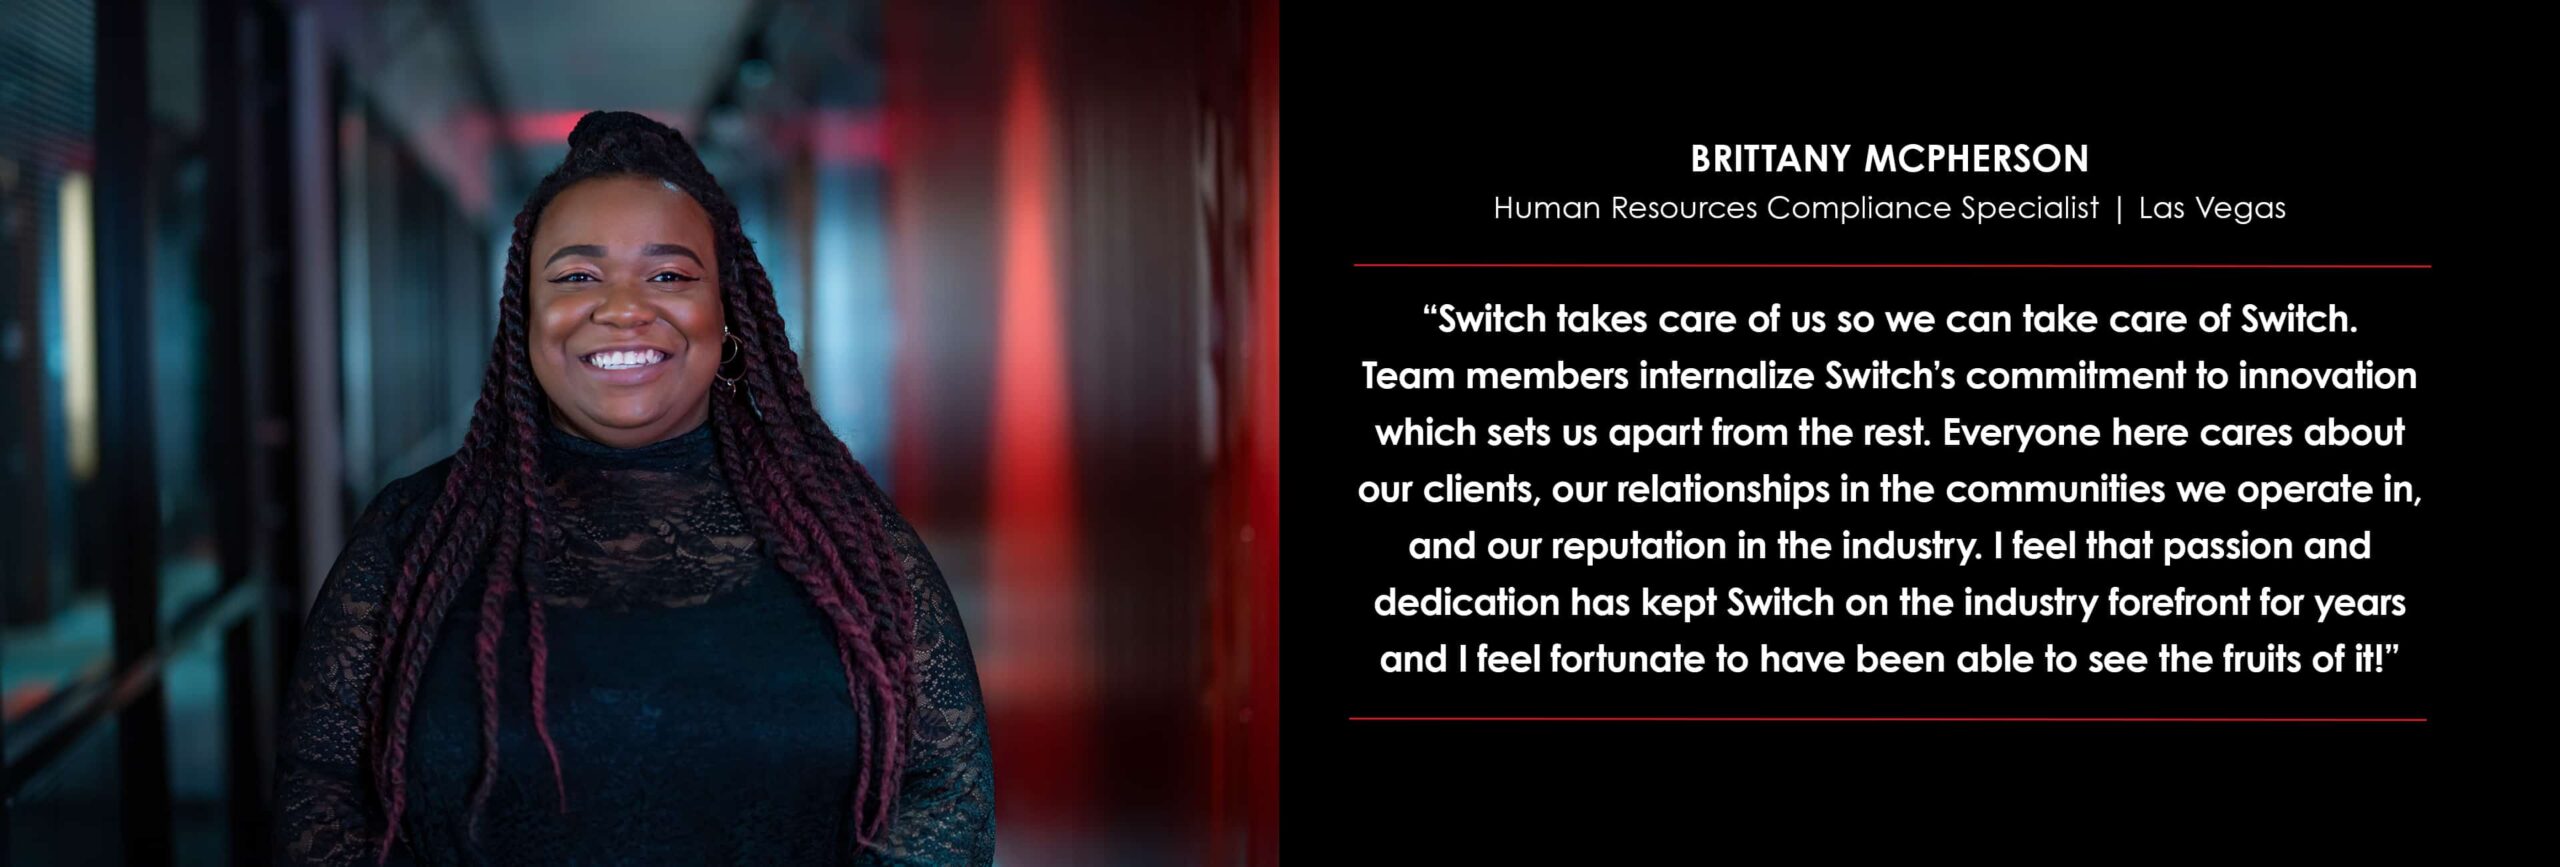 Brittany McPherson | Human Resources Compliance Specialist Testimonial